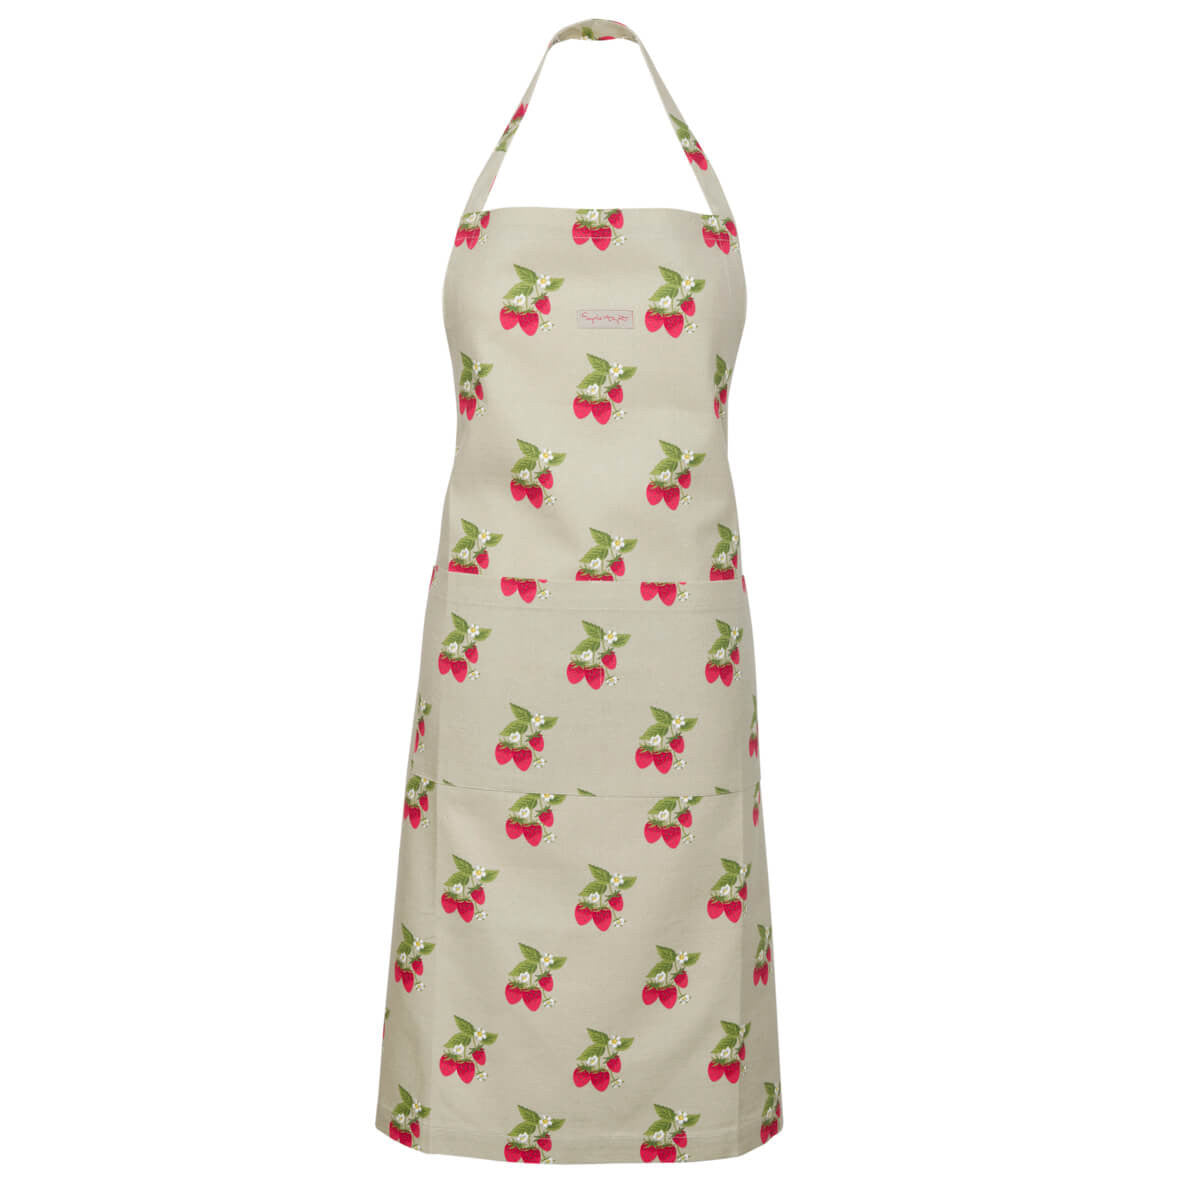 100% Cotton Strawberries adult apron from Sophie Allport